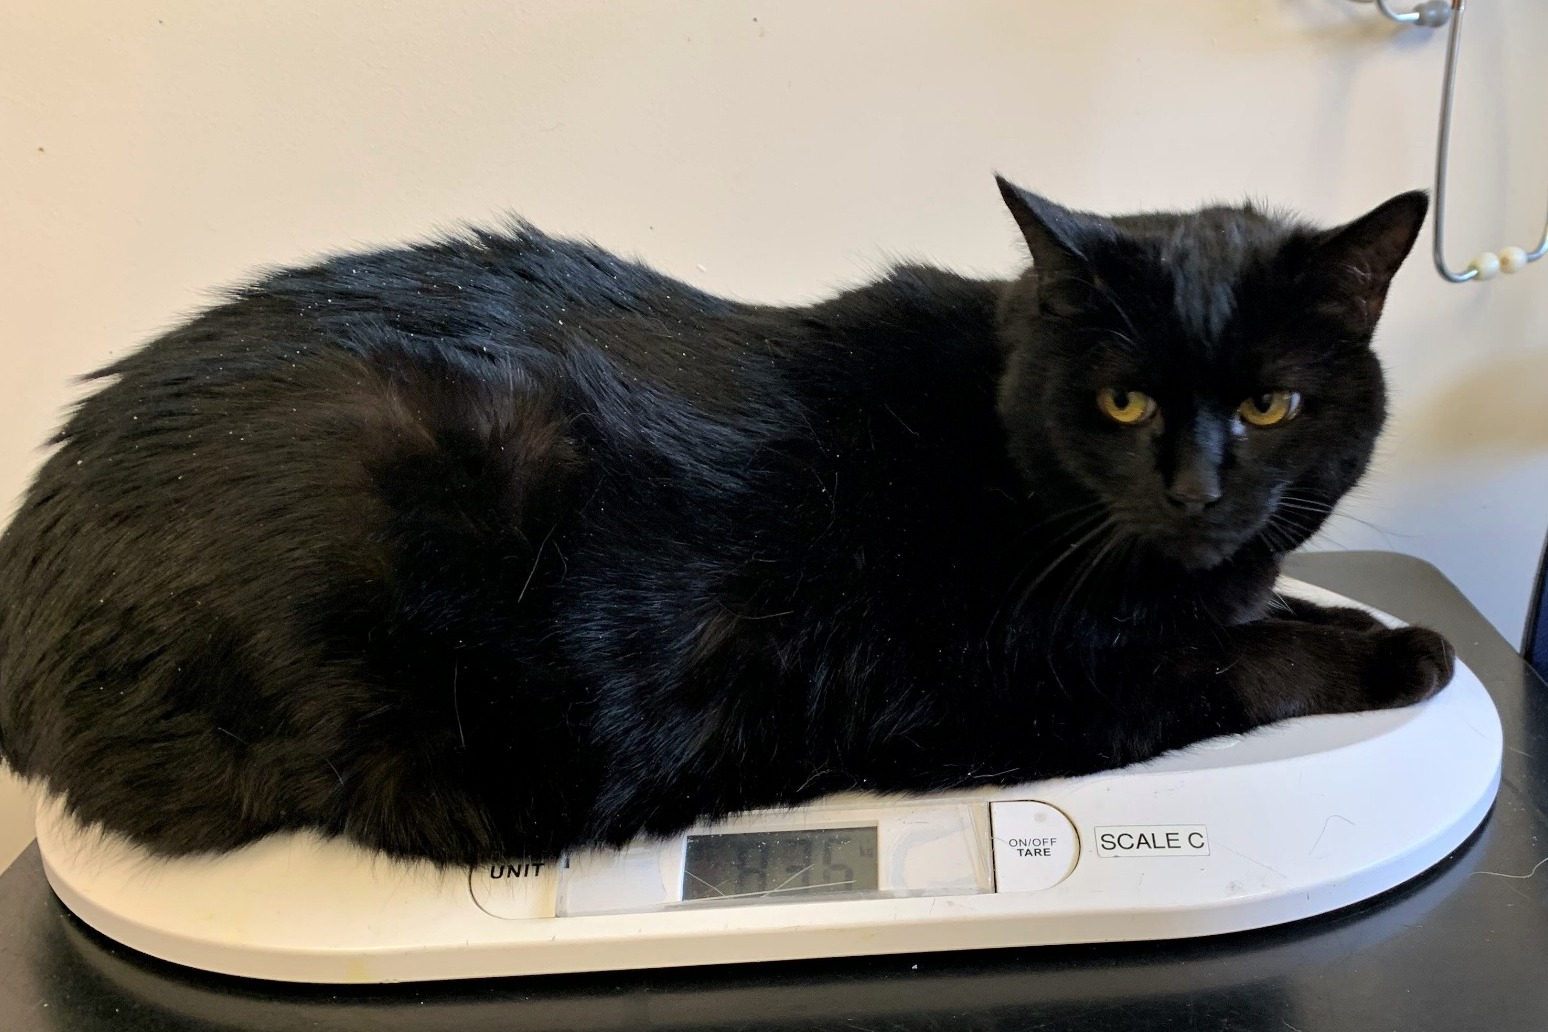 Cat put on a diet after ballooning to almost double the average weight 